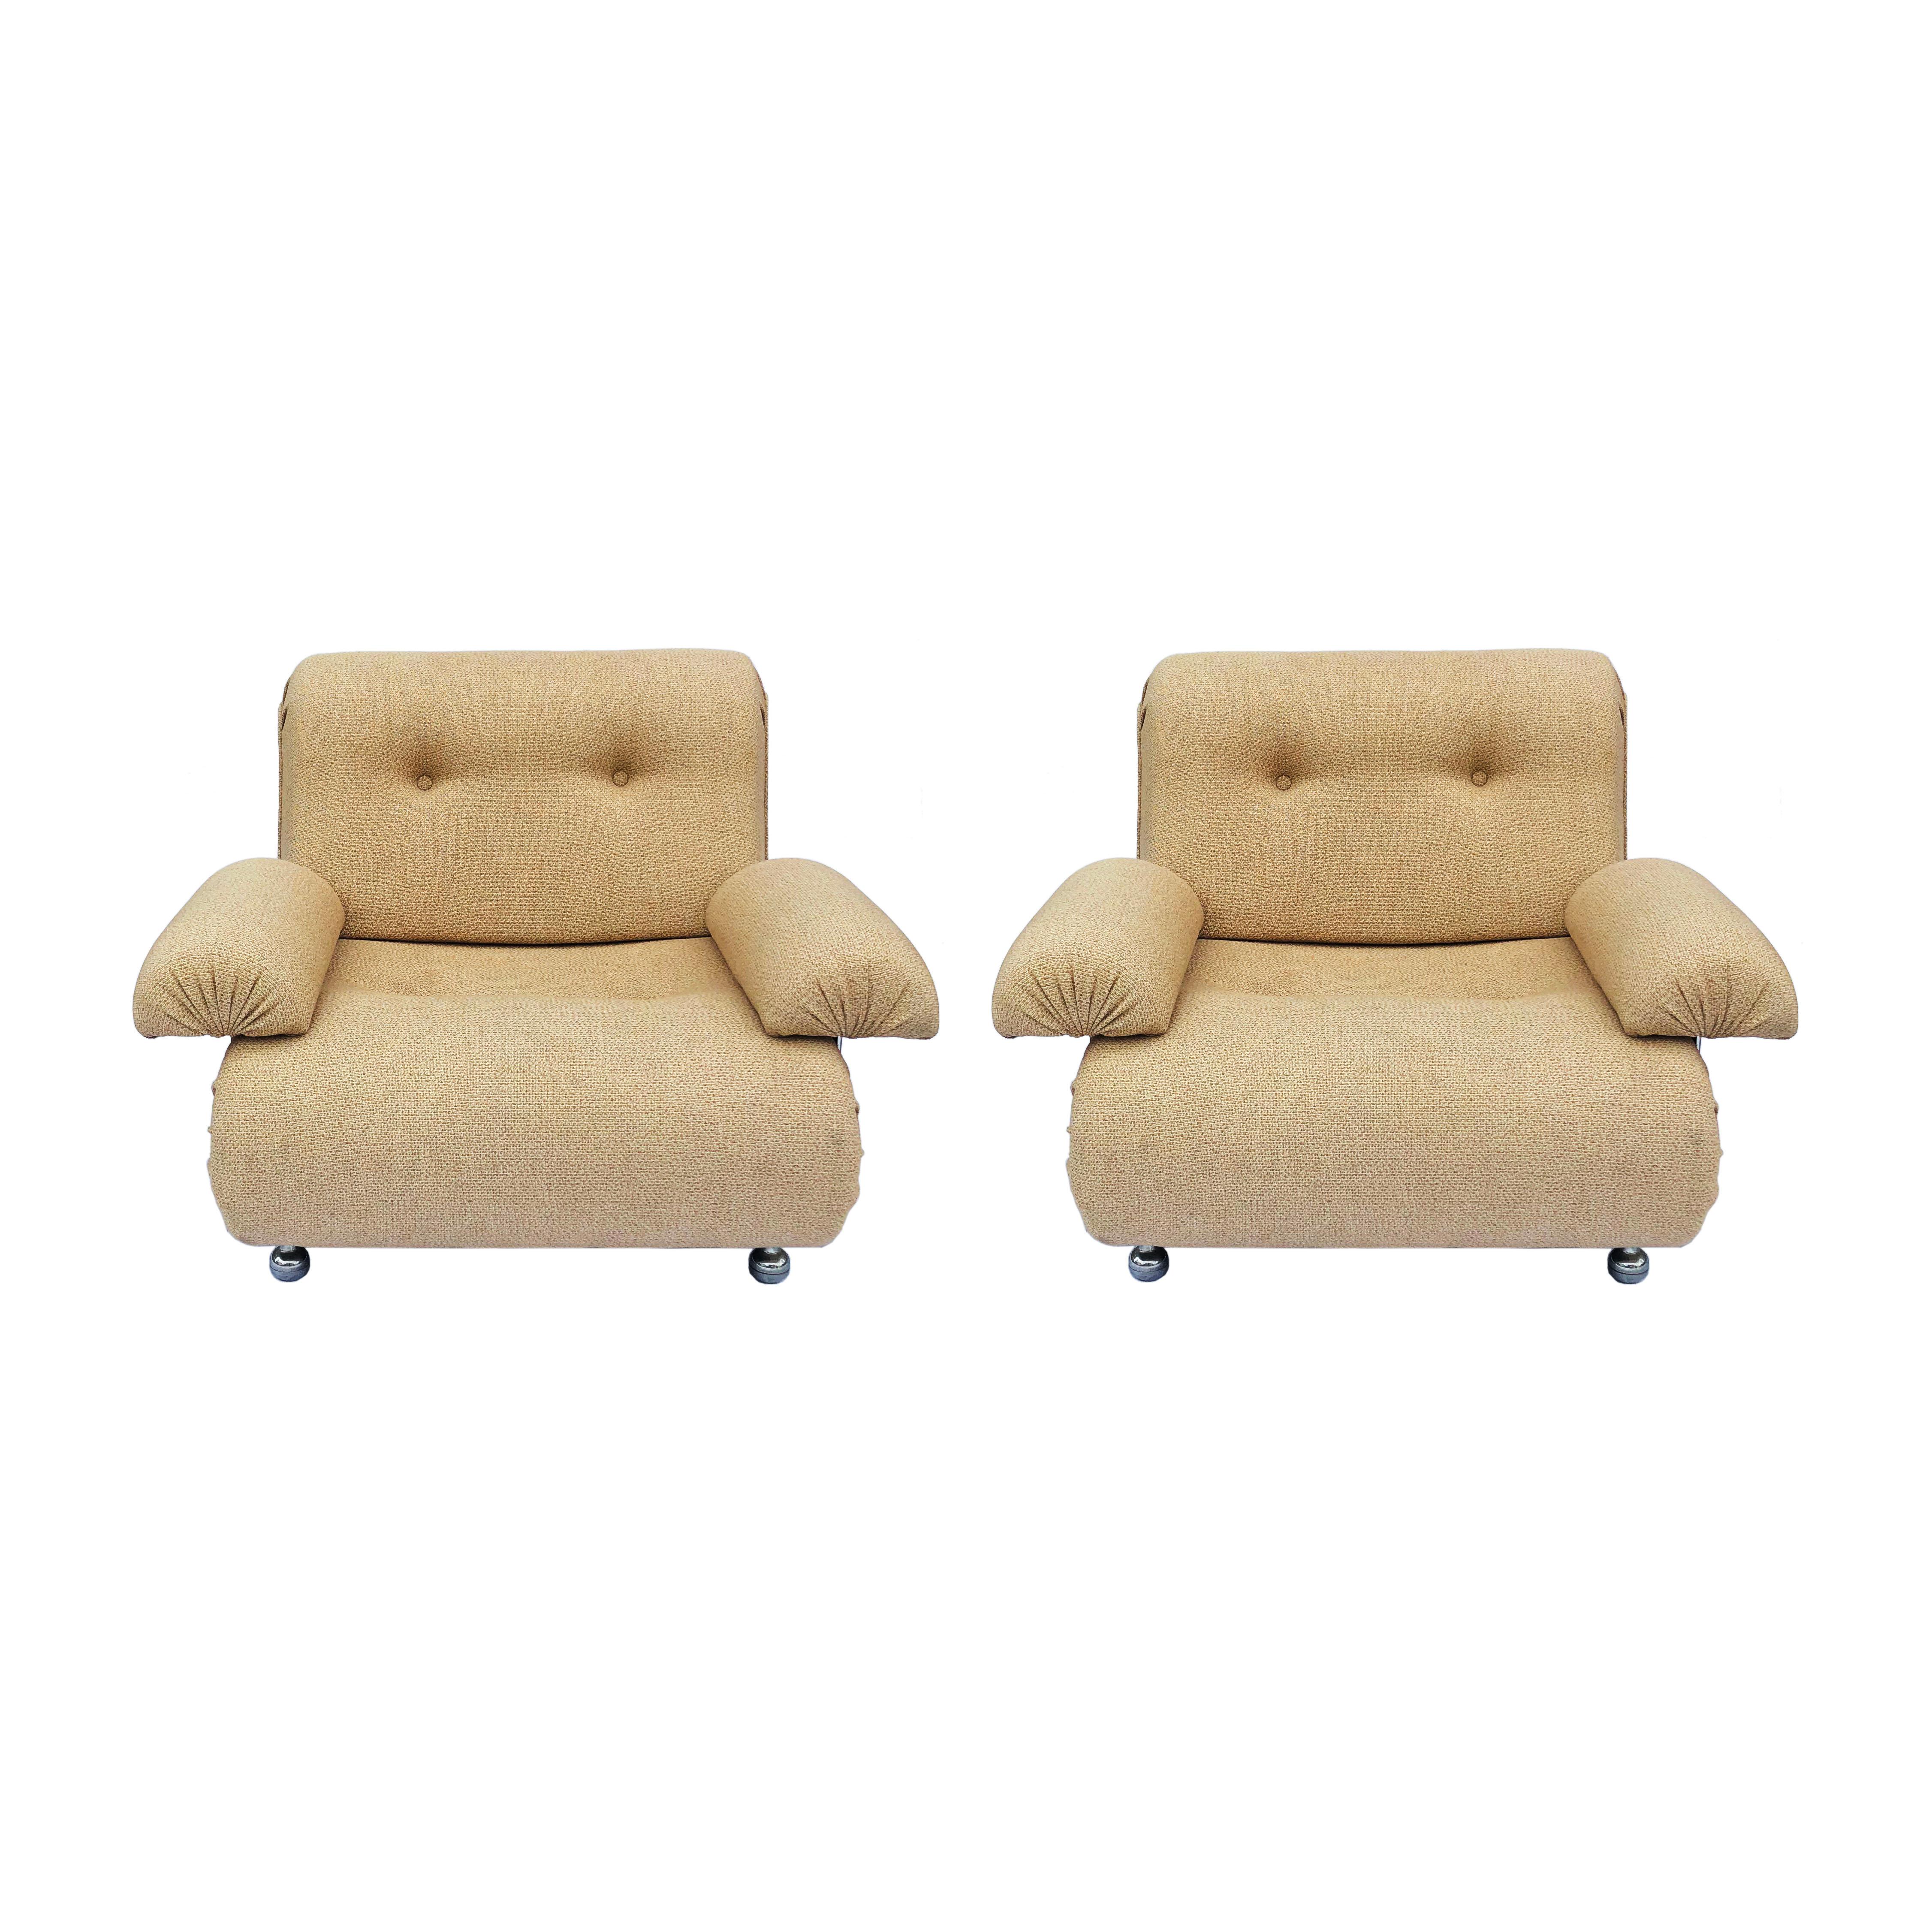 Pair of G-plan modular low armchairs with original beige/brown upholstery and chrome frame. The body looks like one long foam that folds and creates a seat, the foam stays in place with the buttons. Very comfortable armchairs with wide removable